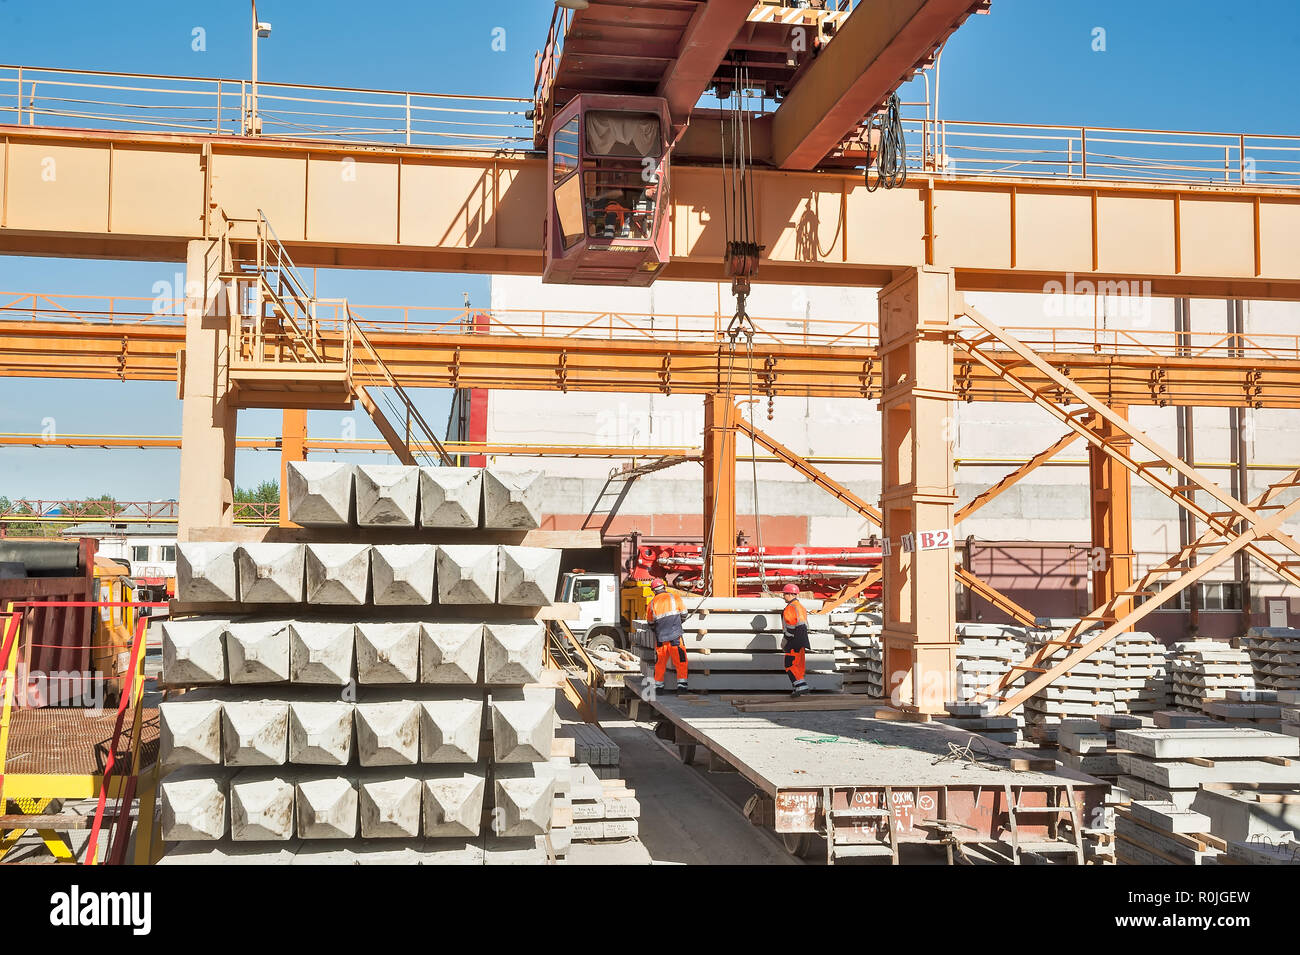 Tyumen, Russia - August 13, 2013: Finished goods warehouse at Concrete Goods Plant No. 5. Slinger with crane operator work on concrete products loadin Stock Photo